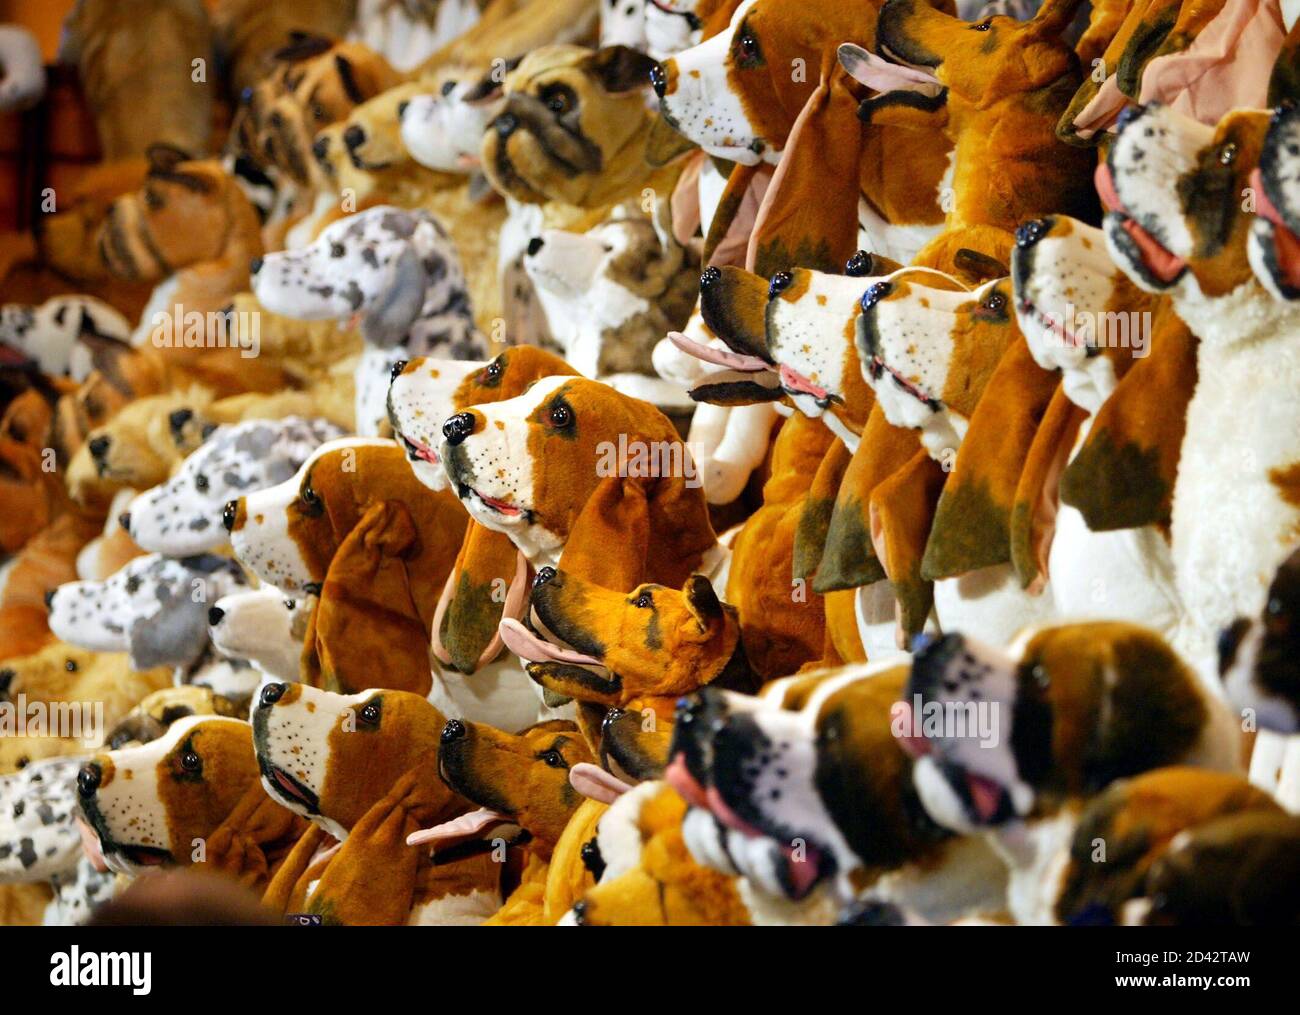 Stuffed toy dogs stand on display at the Crufts dog show in Birmingham, March 6, 2003.  The 100th Crufts show, which was founded in 1891 by entrepreneur [Charles Cruft], is expected to attract more than 170 breeds of dog who will compete for this year's best-in-show title, awarded on the competition's final day on Sunday. Stock Photo